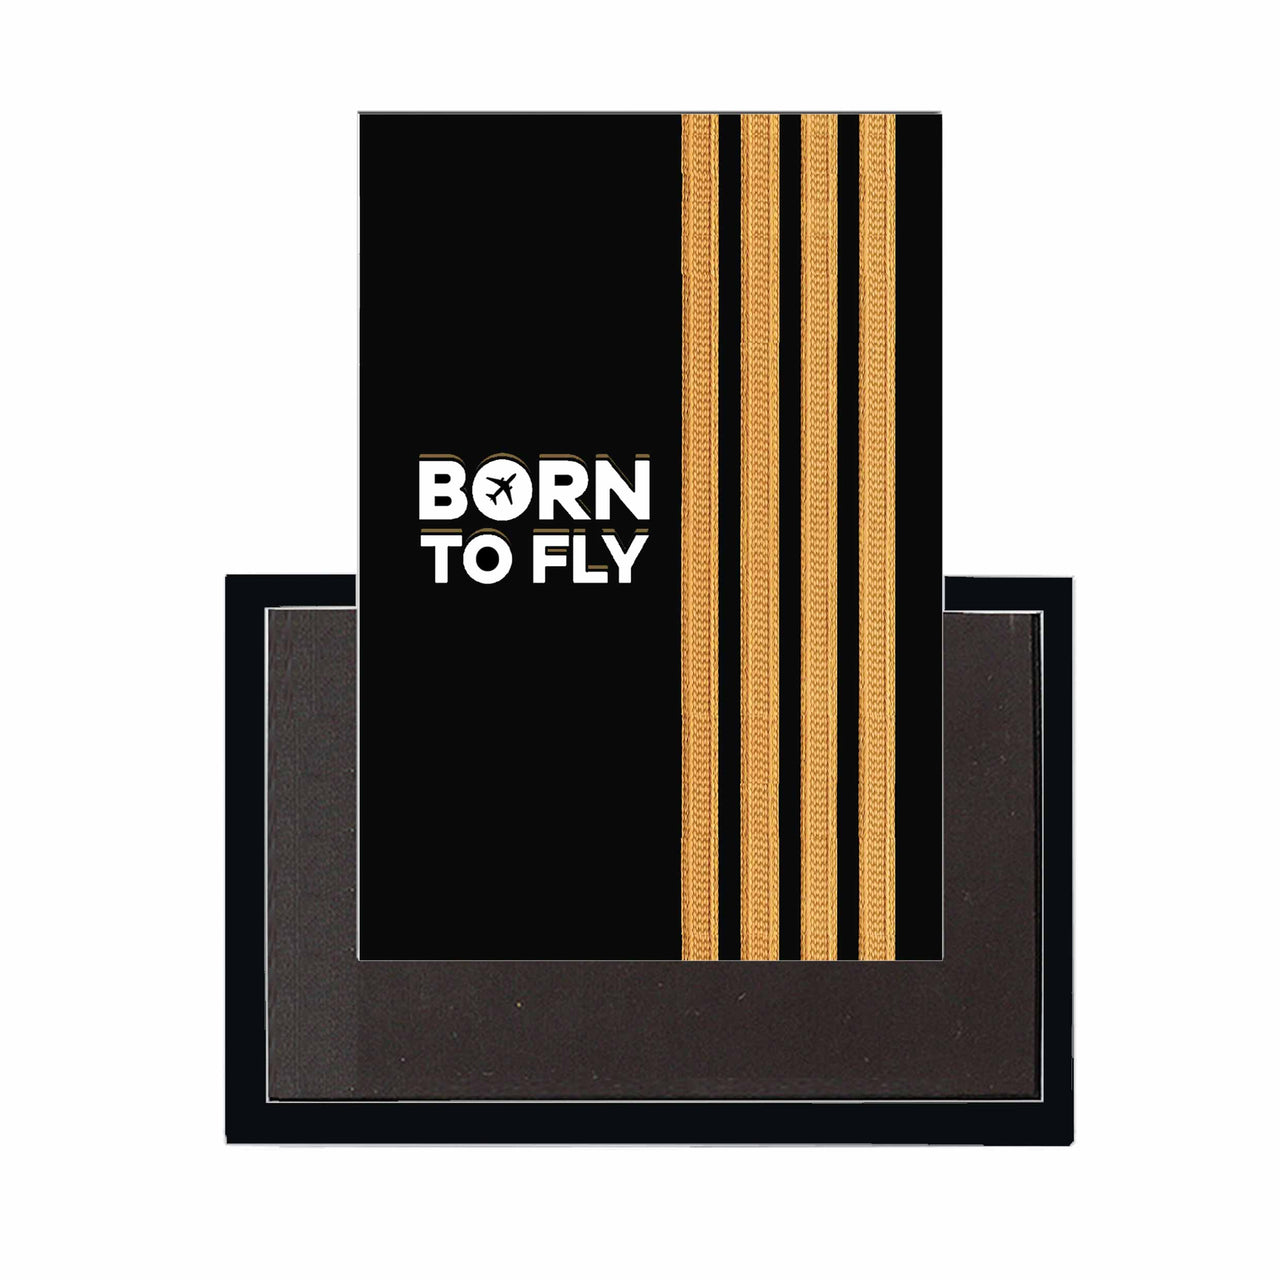 Born To Fly & Pilot Epaulettes (4 Lines) Designed Magnets